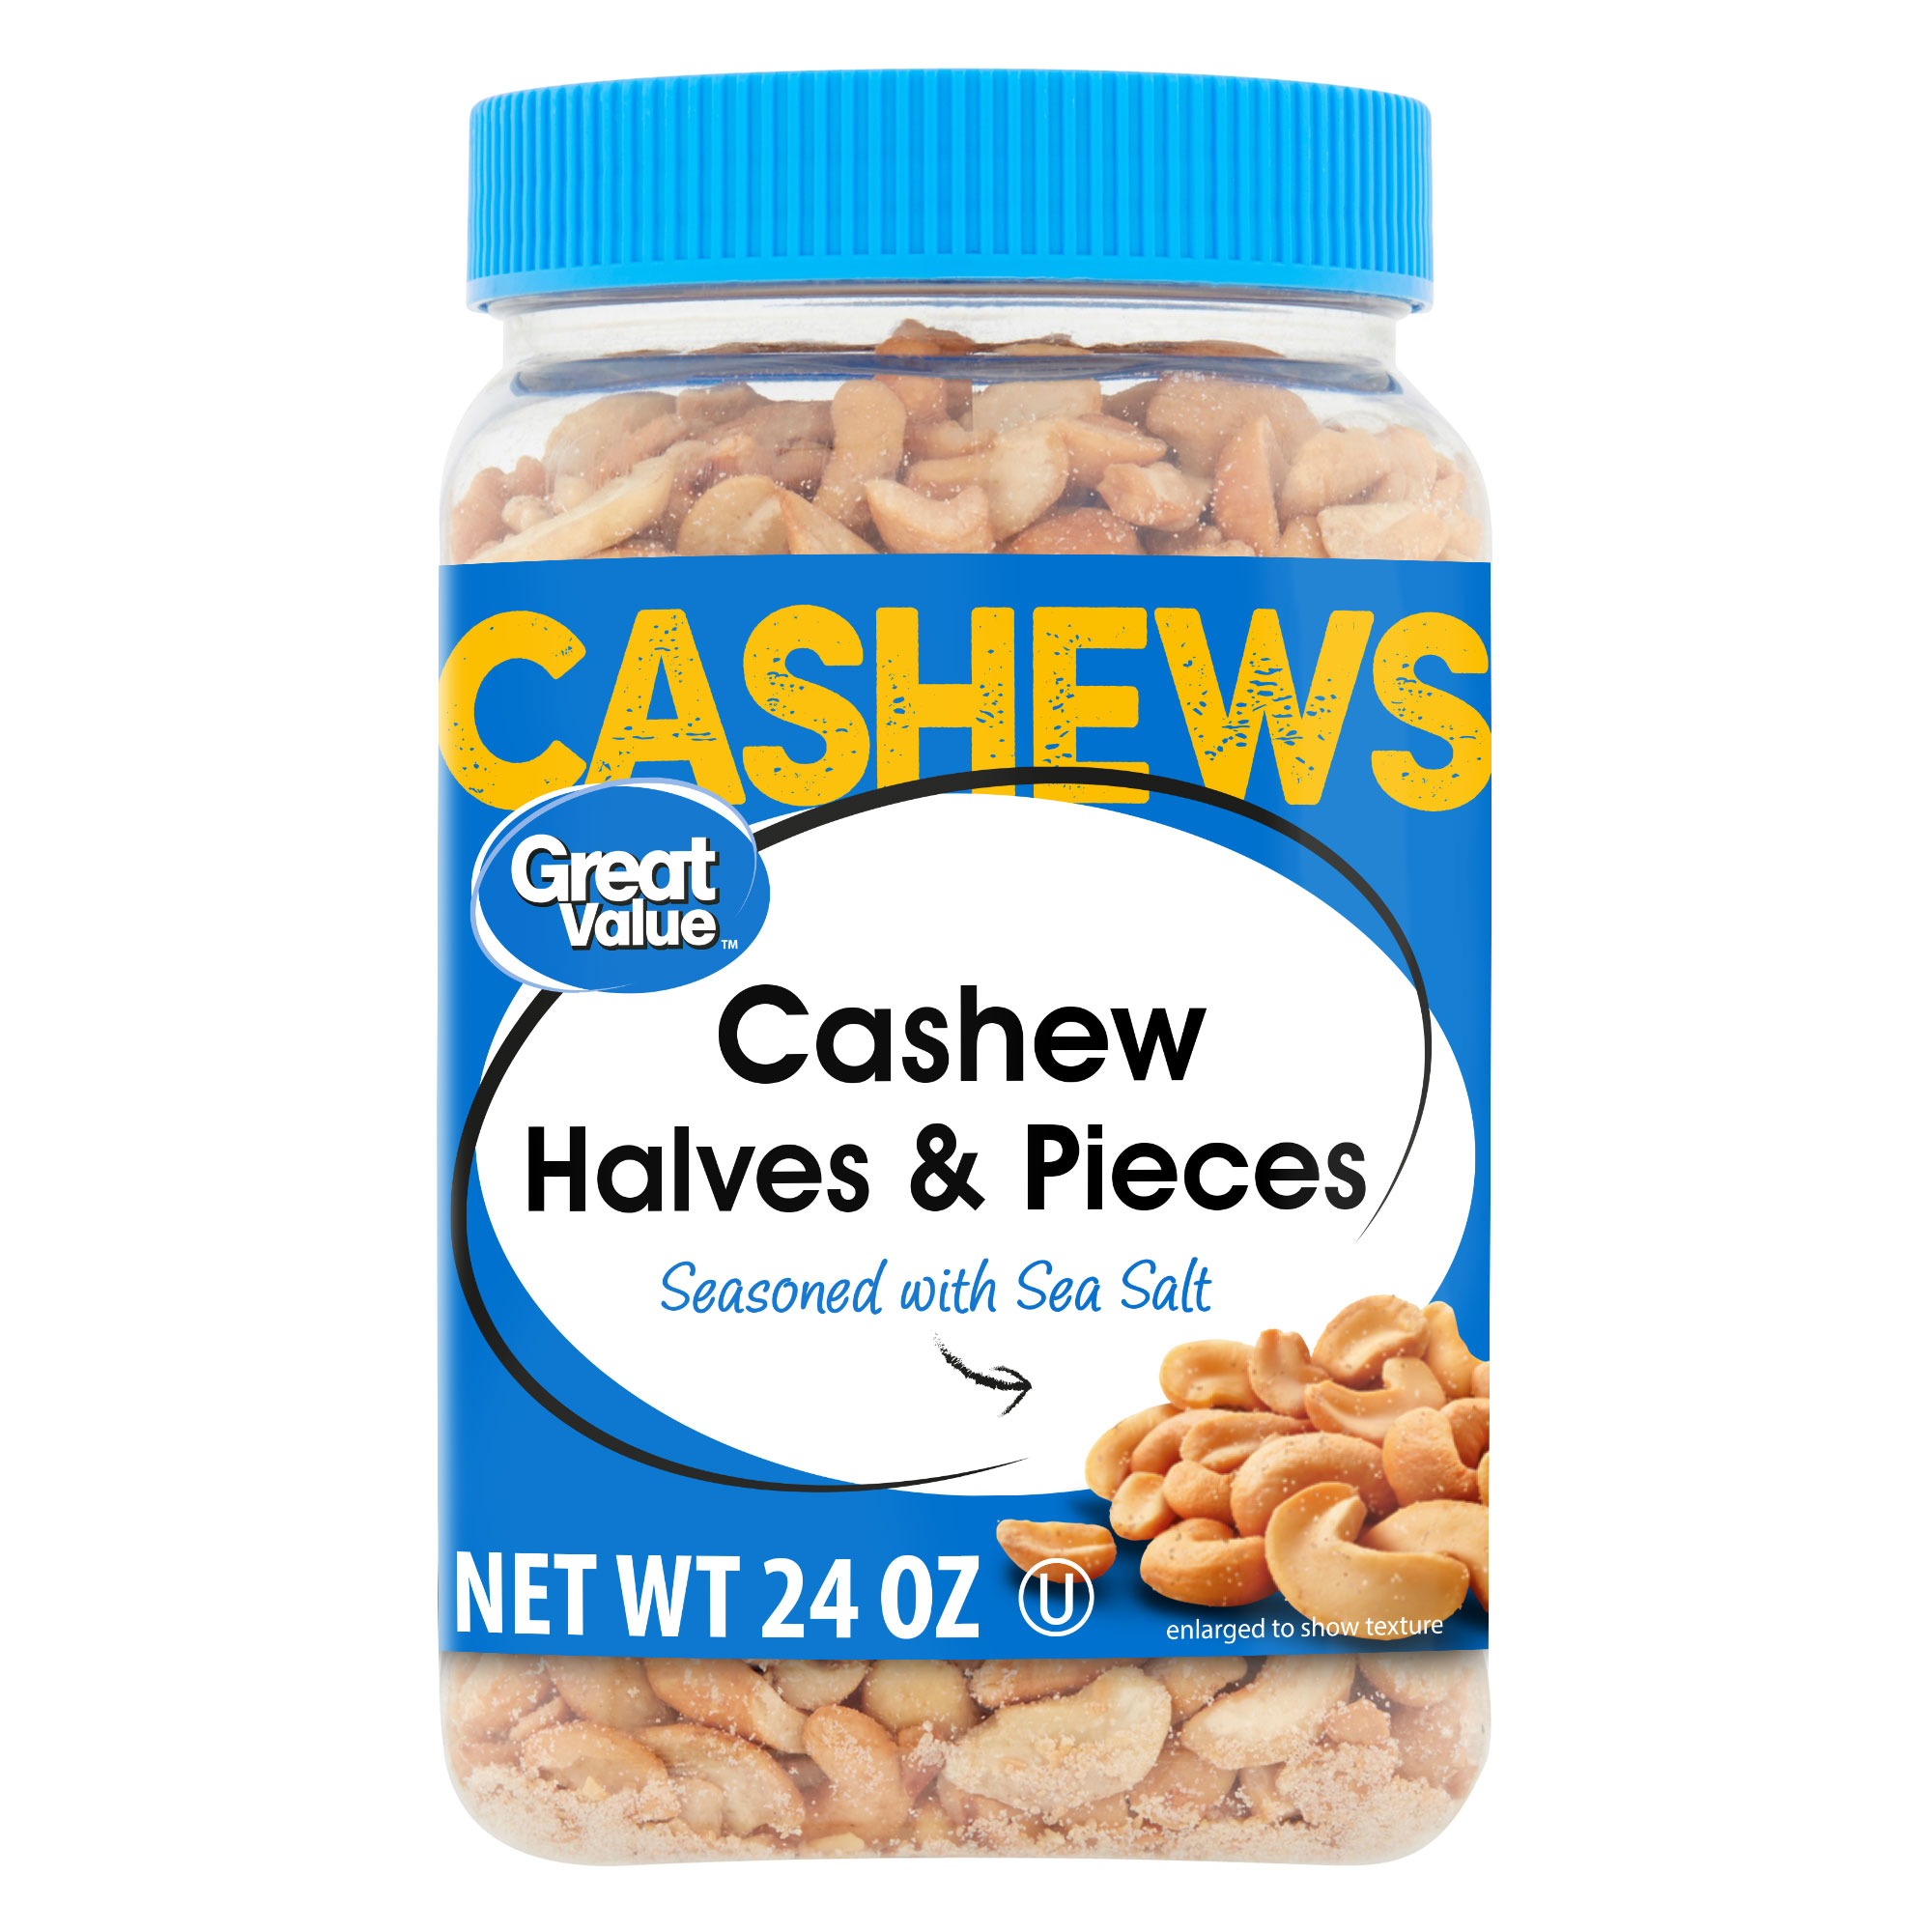 Great Value Roasted & Salted Cashew Halves & Pieces, 24 oz - image 1 of 9